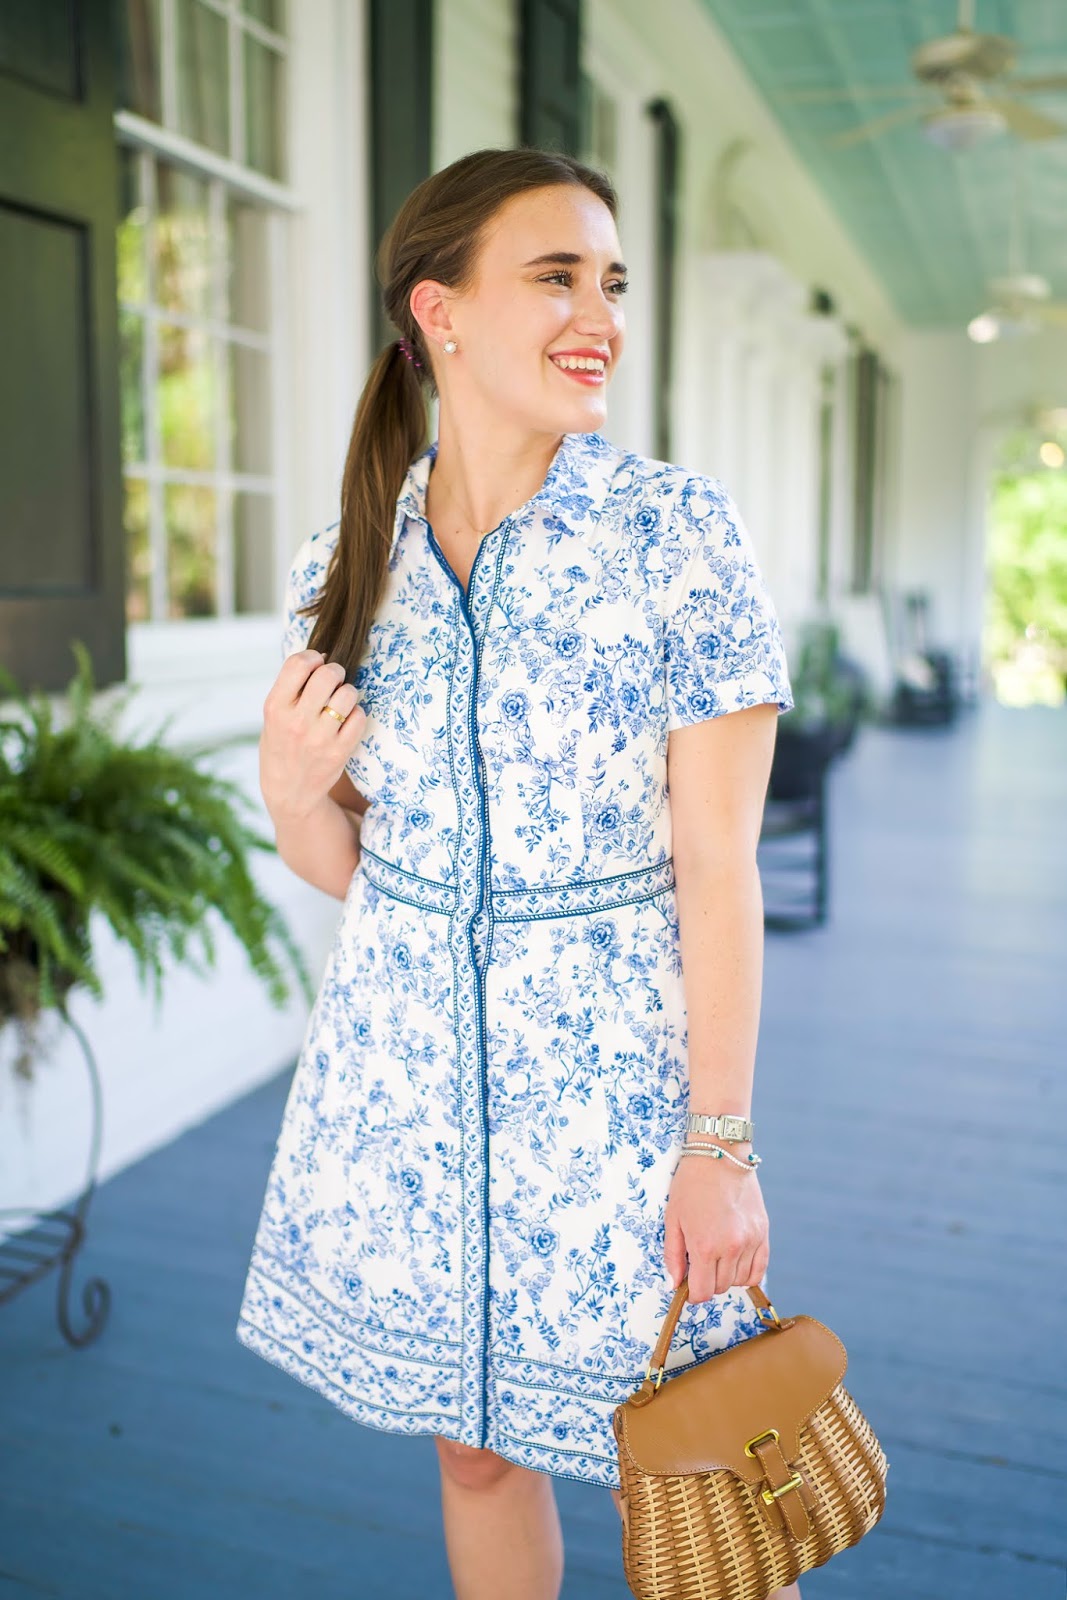 Toile floral shirt dress styled by popular New York fashion blogger Covering the Bases